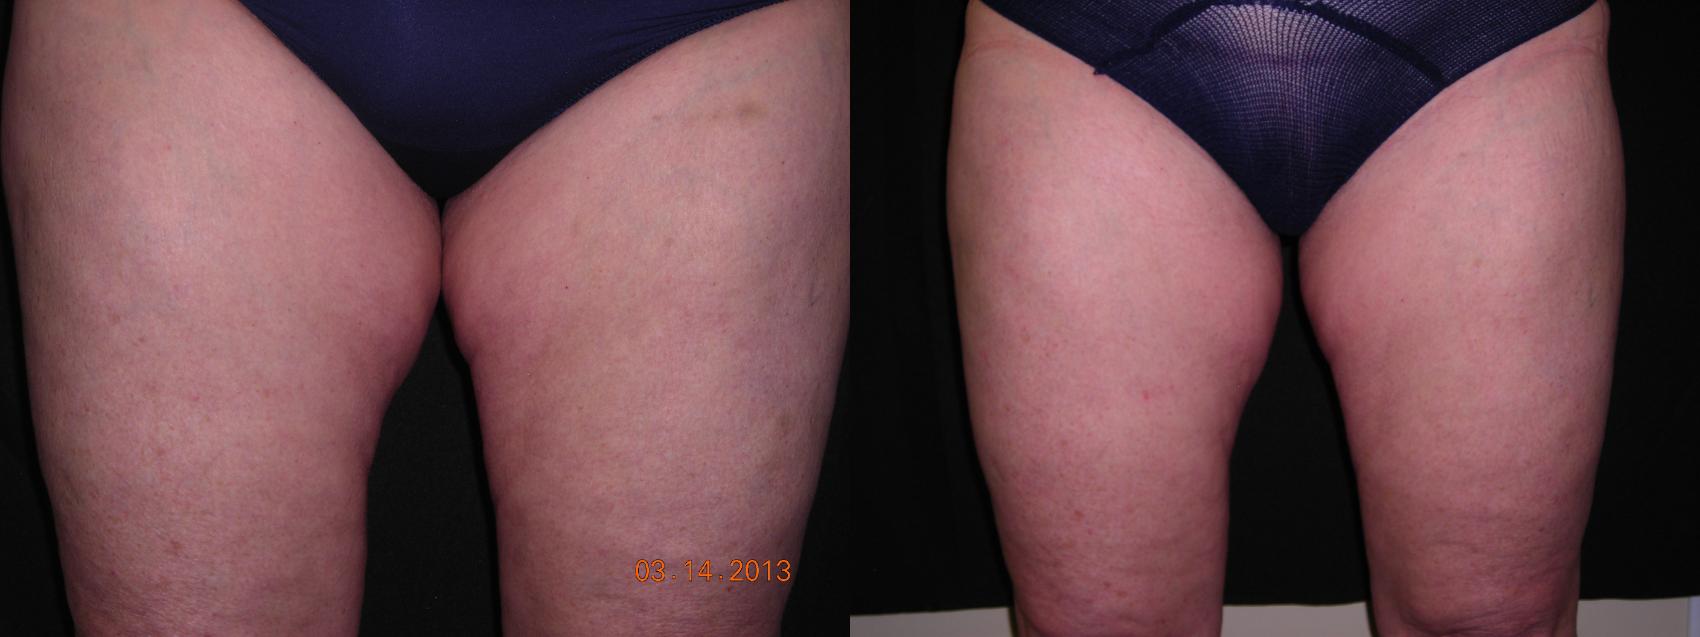 CoolSculpting® Before & After Photo | Marietta, GA | Plastic Surgery Center of the South